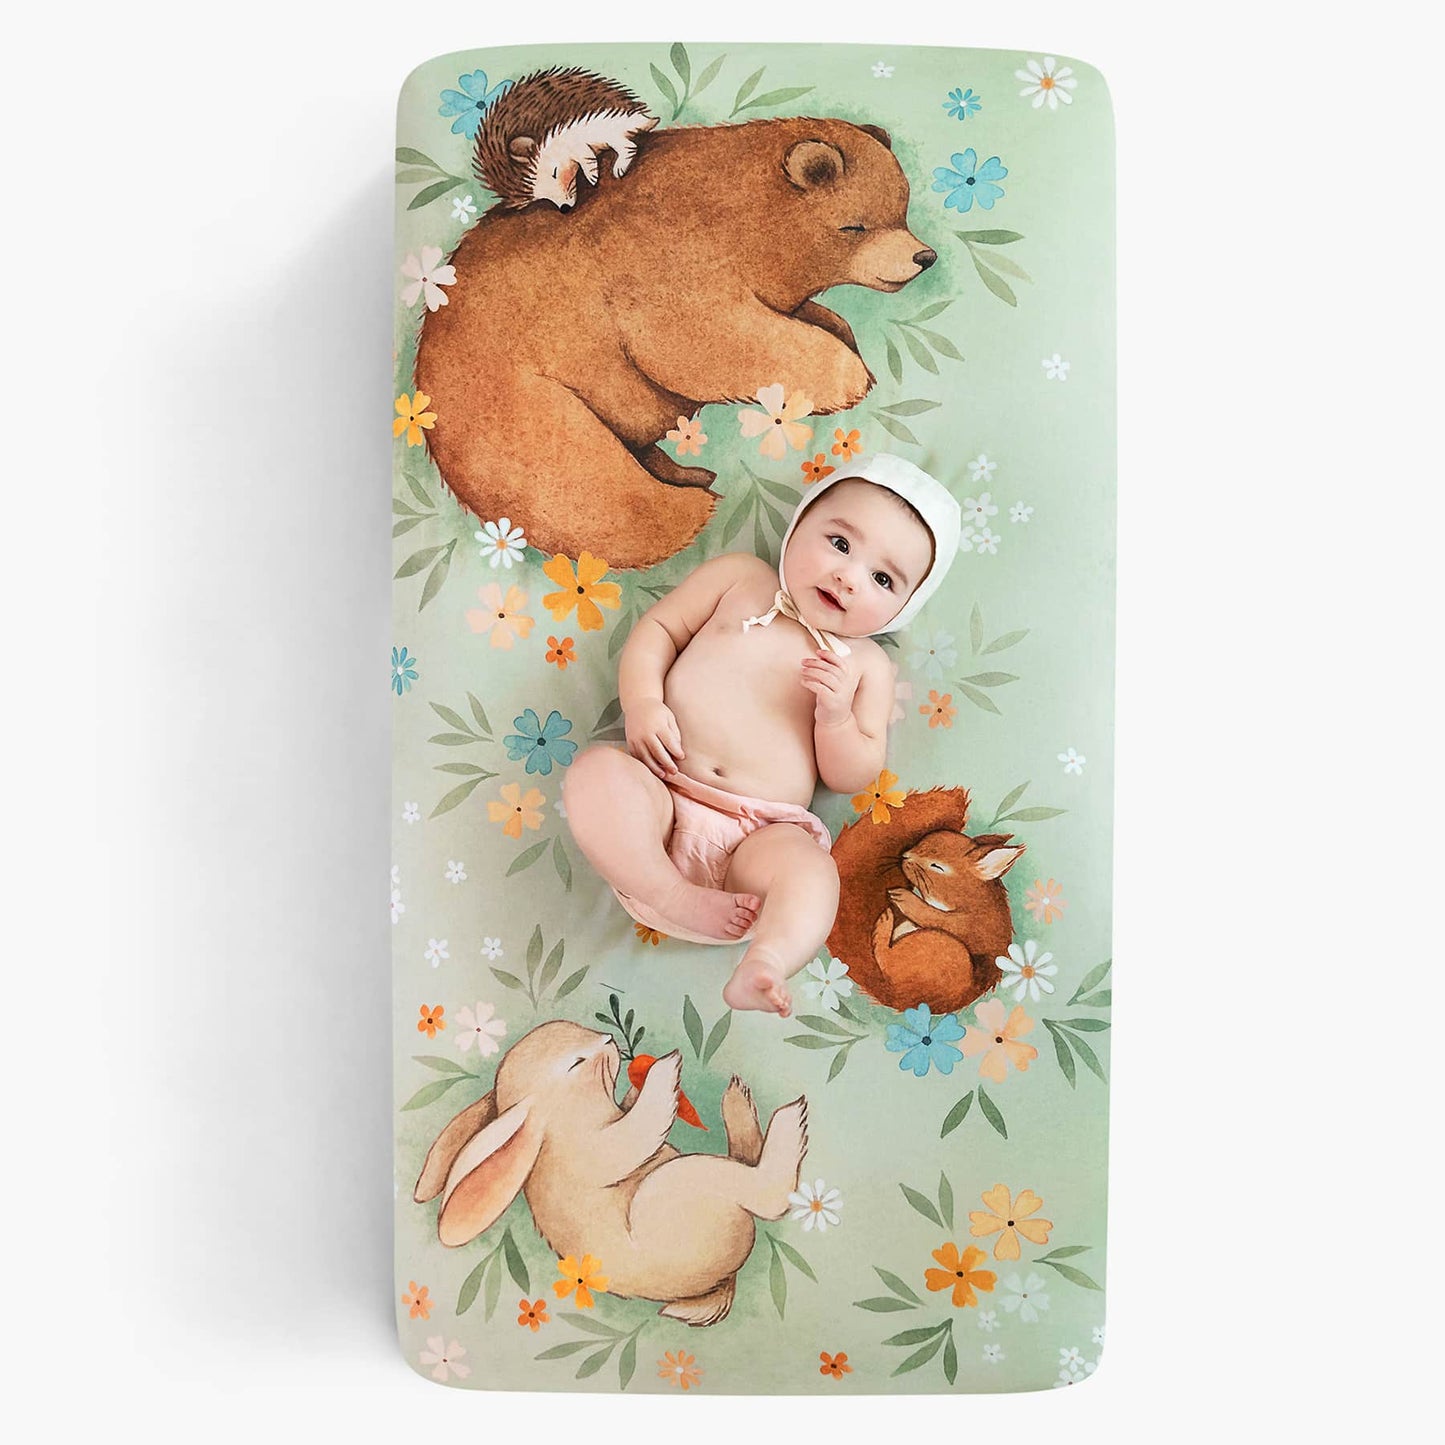 Rookie Humans - Standard Size Crib Sheet Enchanted Meadow